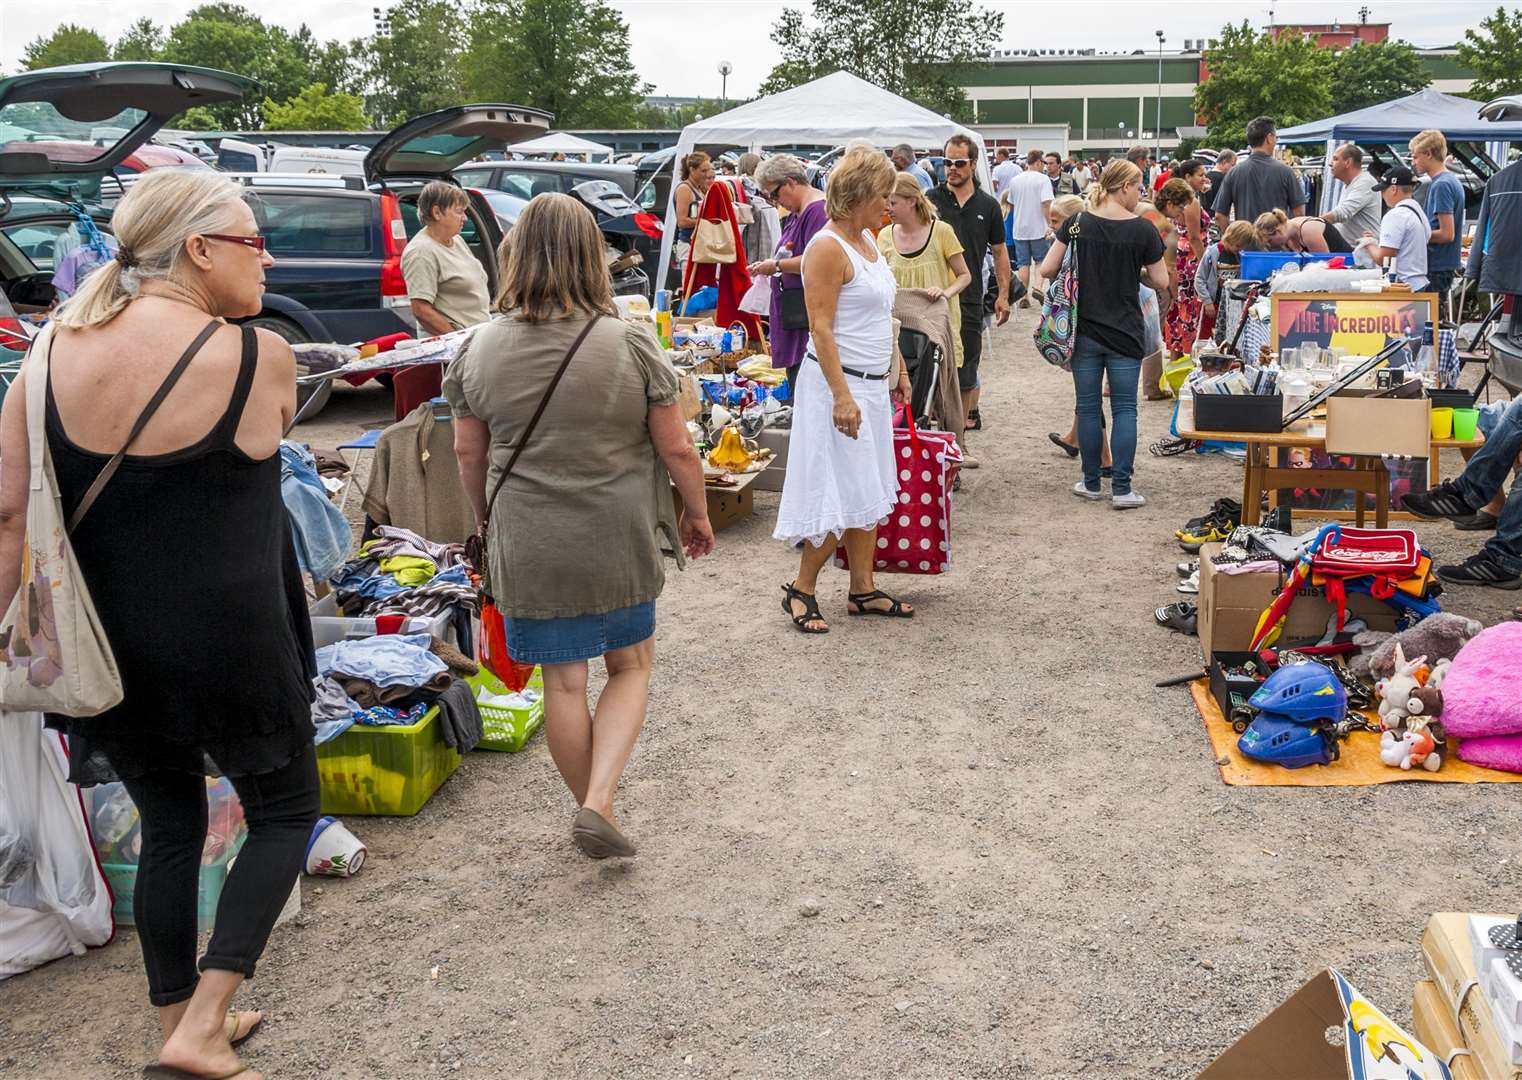 Boot fairs in the county face an uncertain future